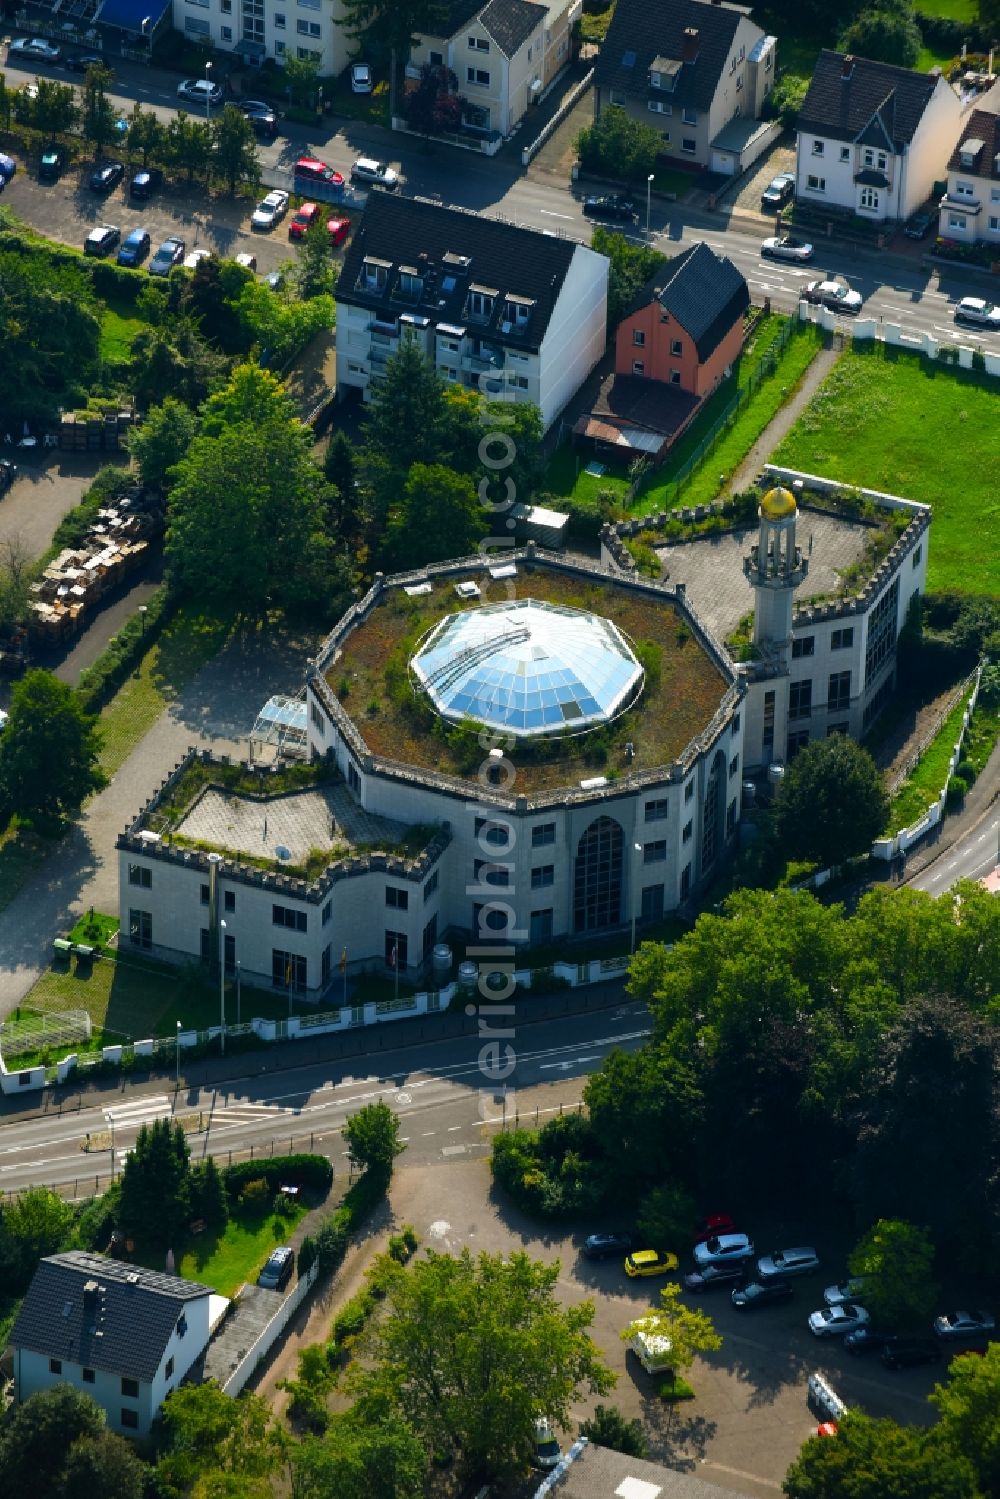 Aerial photograph Bonn - Building of the mosque Koenig-Fahd-Akademie on Mallwitzstrasse in the district Bad Godesberg in Bonn in the state North Rhine-Westphalia, Germany